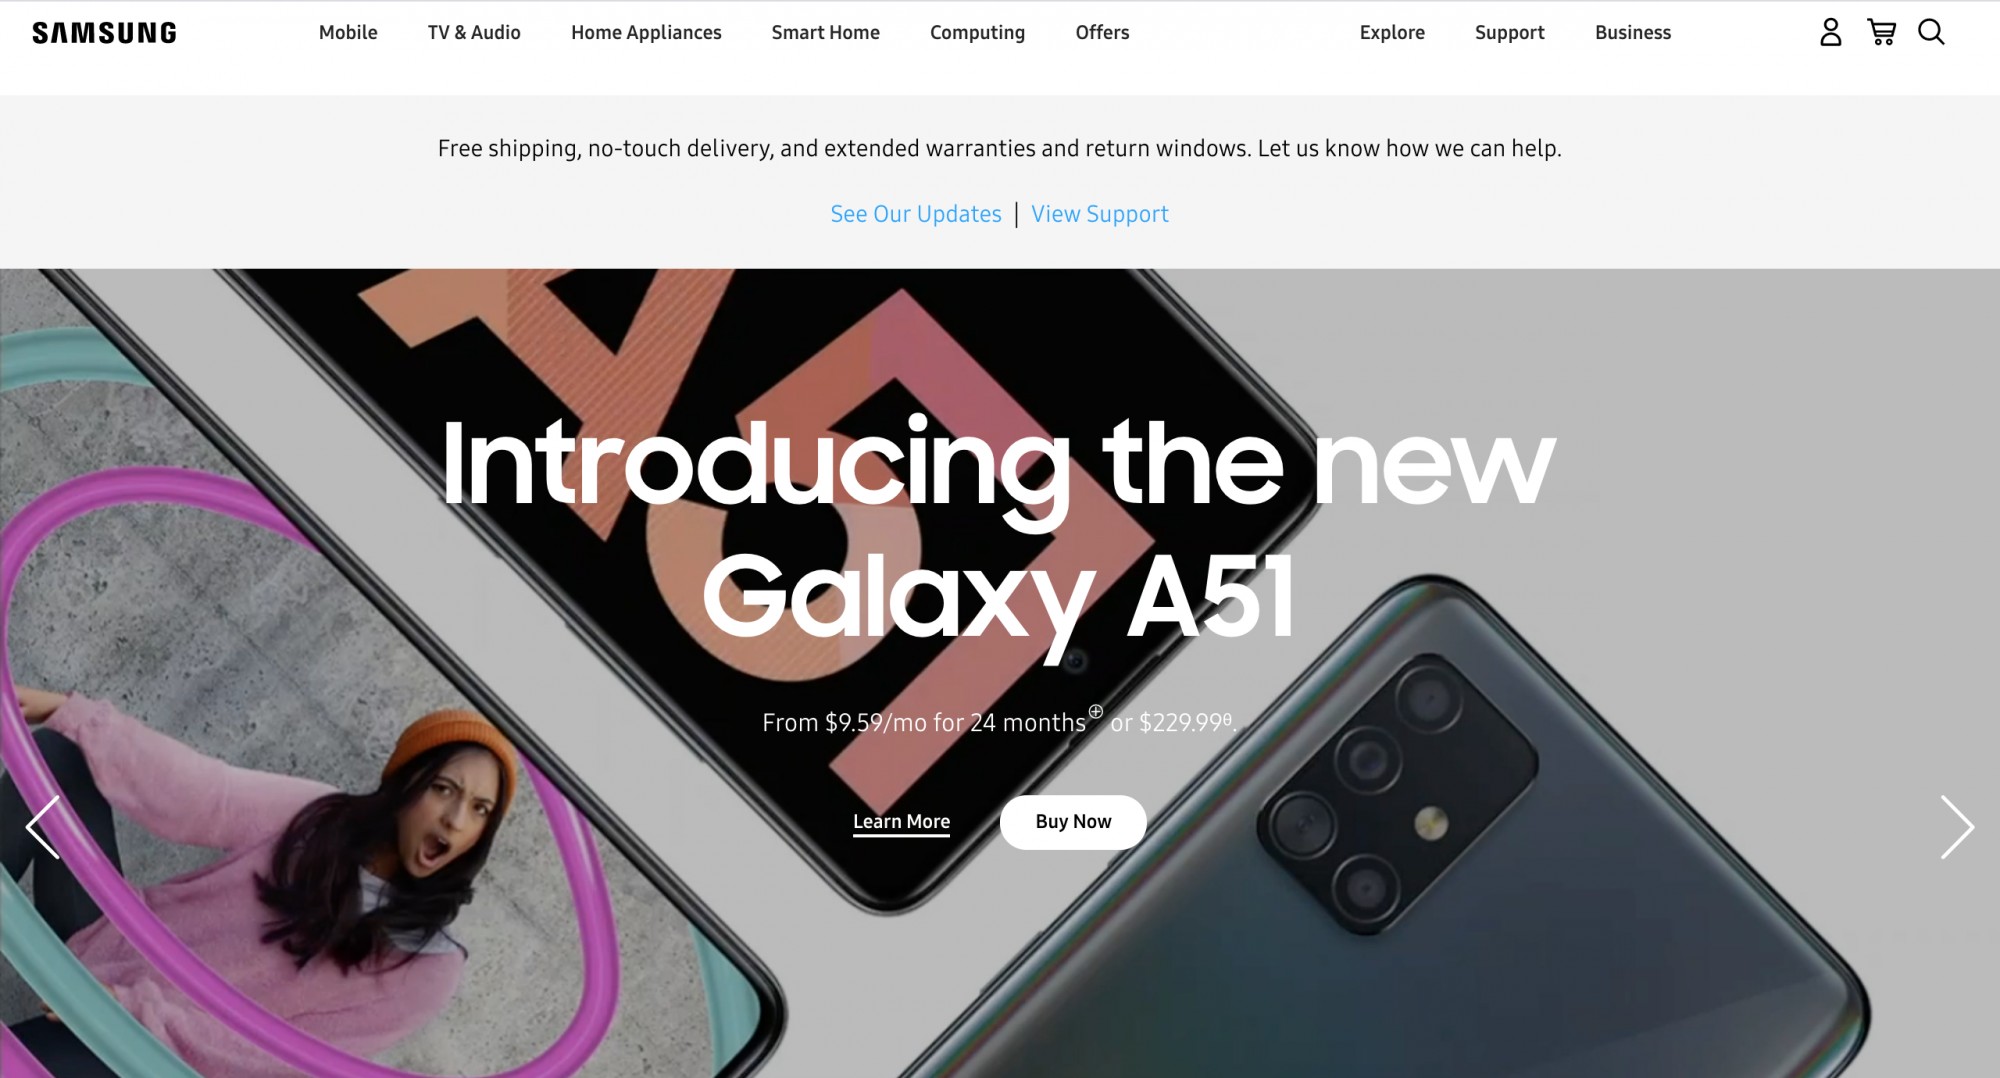 Samsung landing page with Galaxy A51 and main message with buttons